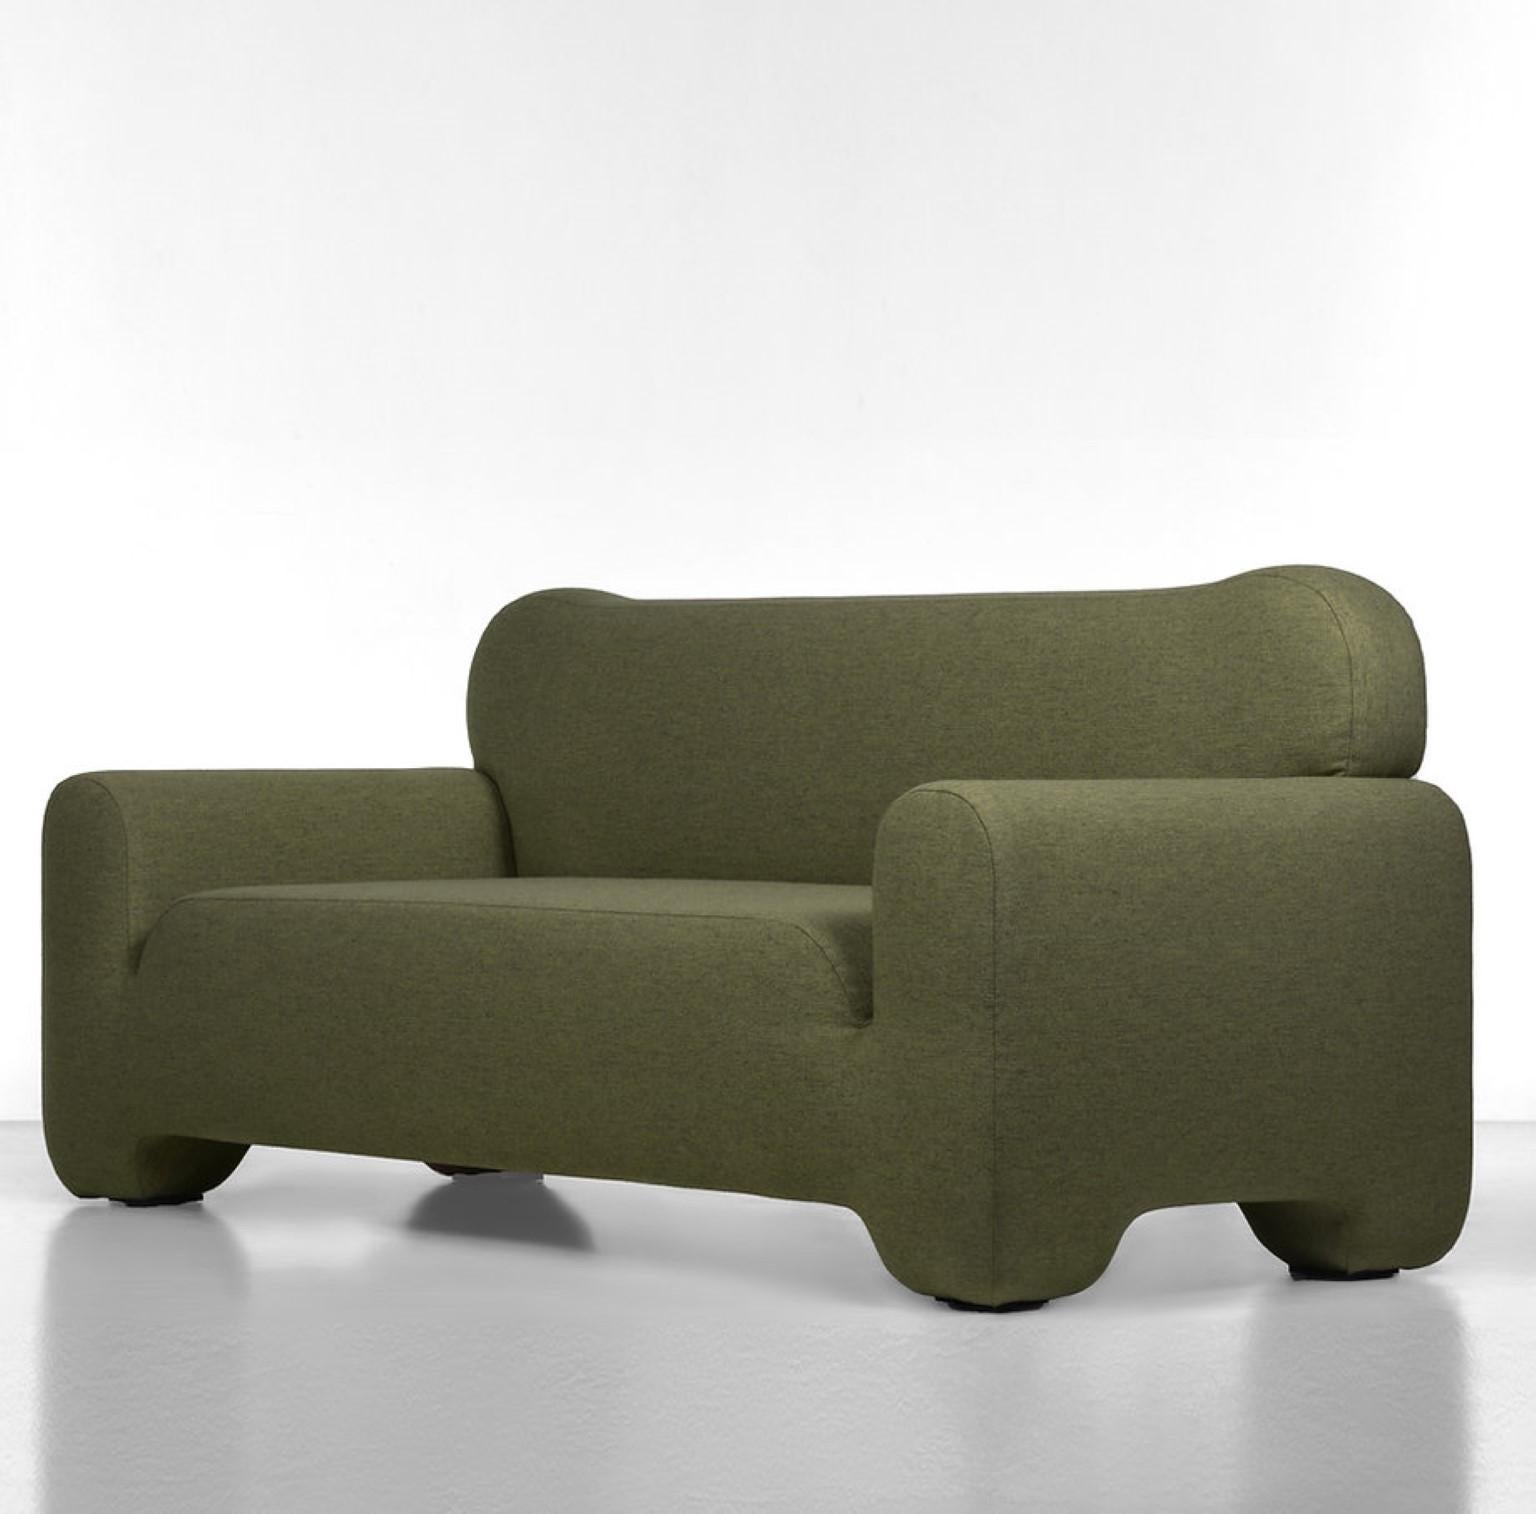 Green Pampukh sofa by Faina
Design: Victoriya Yakusha
Materials: Textile, foam rubber, sintepon, wood
Dimensions: W 240 x D 82 x H 79 cm

Unusual convex lines of the PAMPUKH series are ideally combined with its volumetric silhouette. PAMPUKH seems